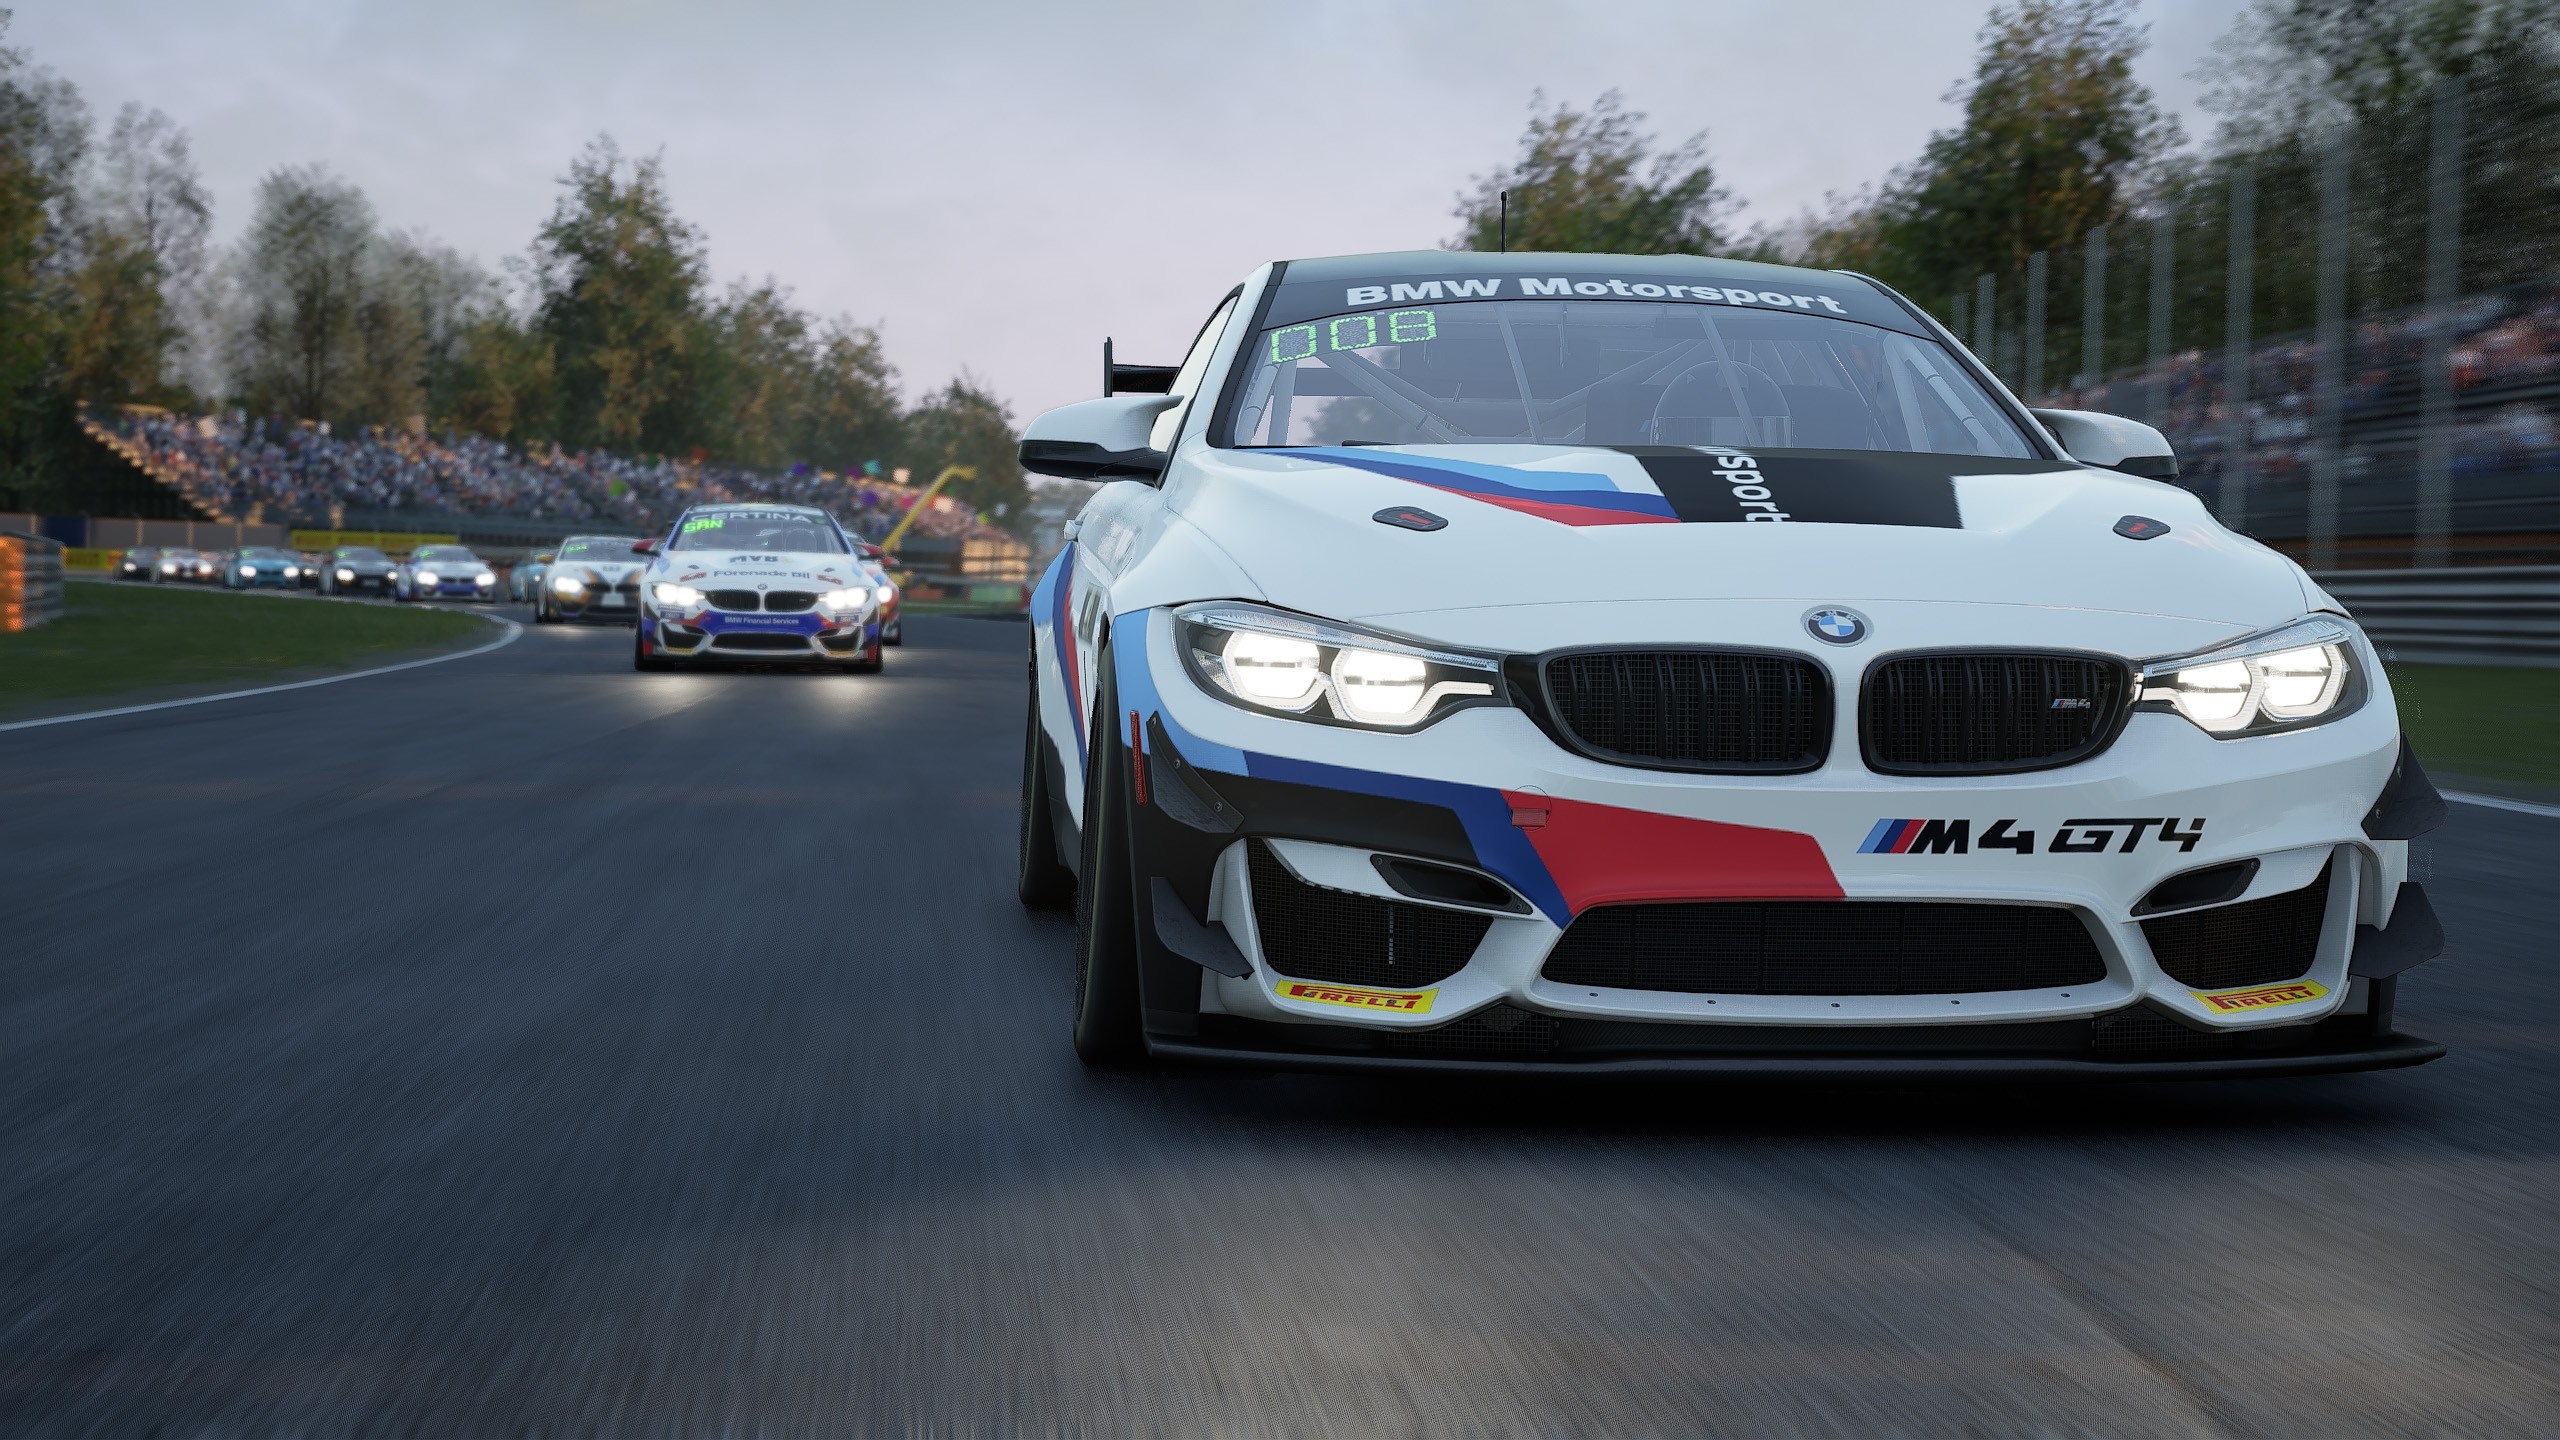 BMW SIM Cups 2021 offer larger range of formats, BMW race cars and